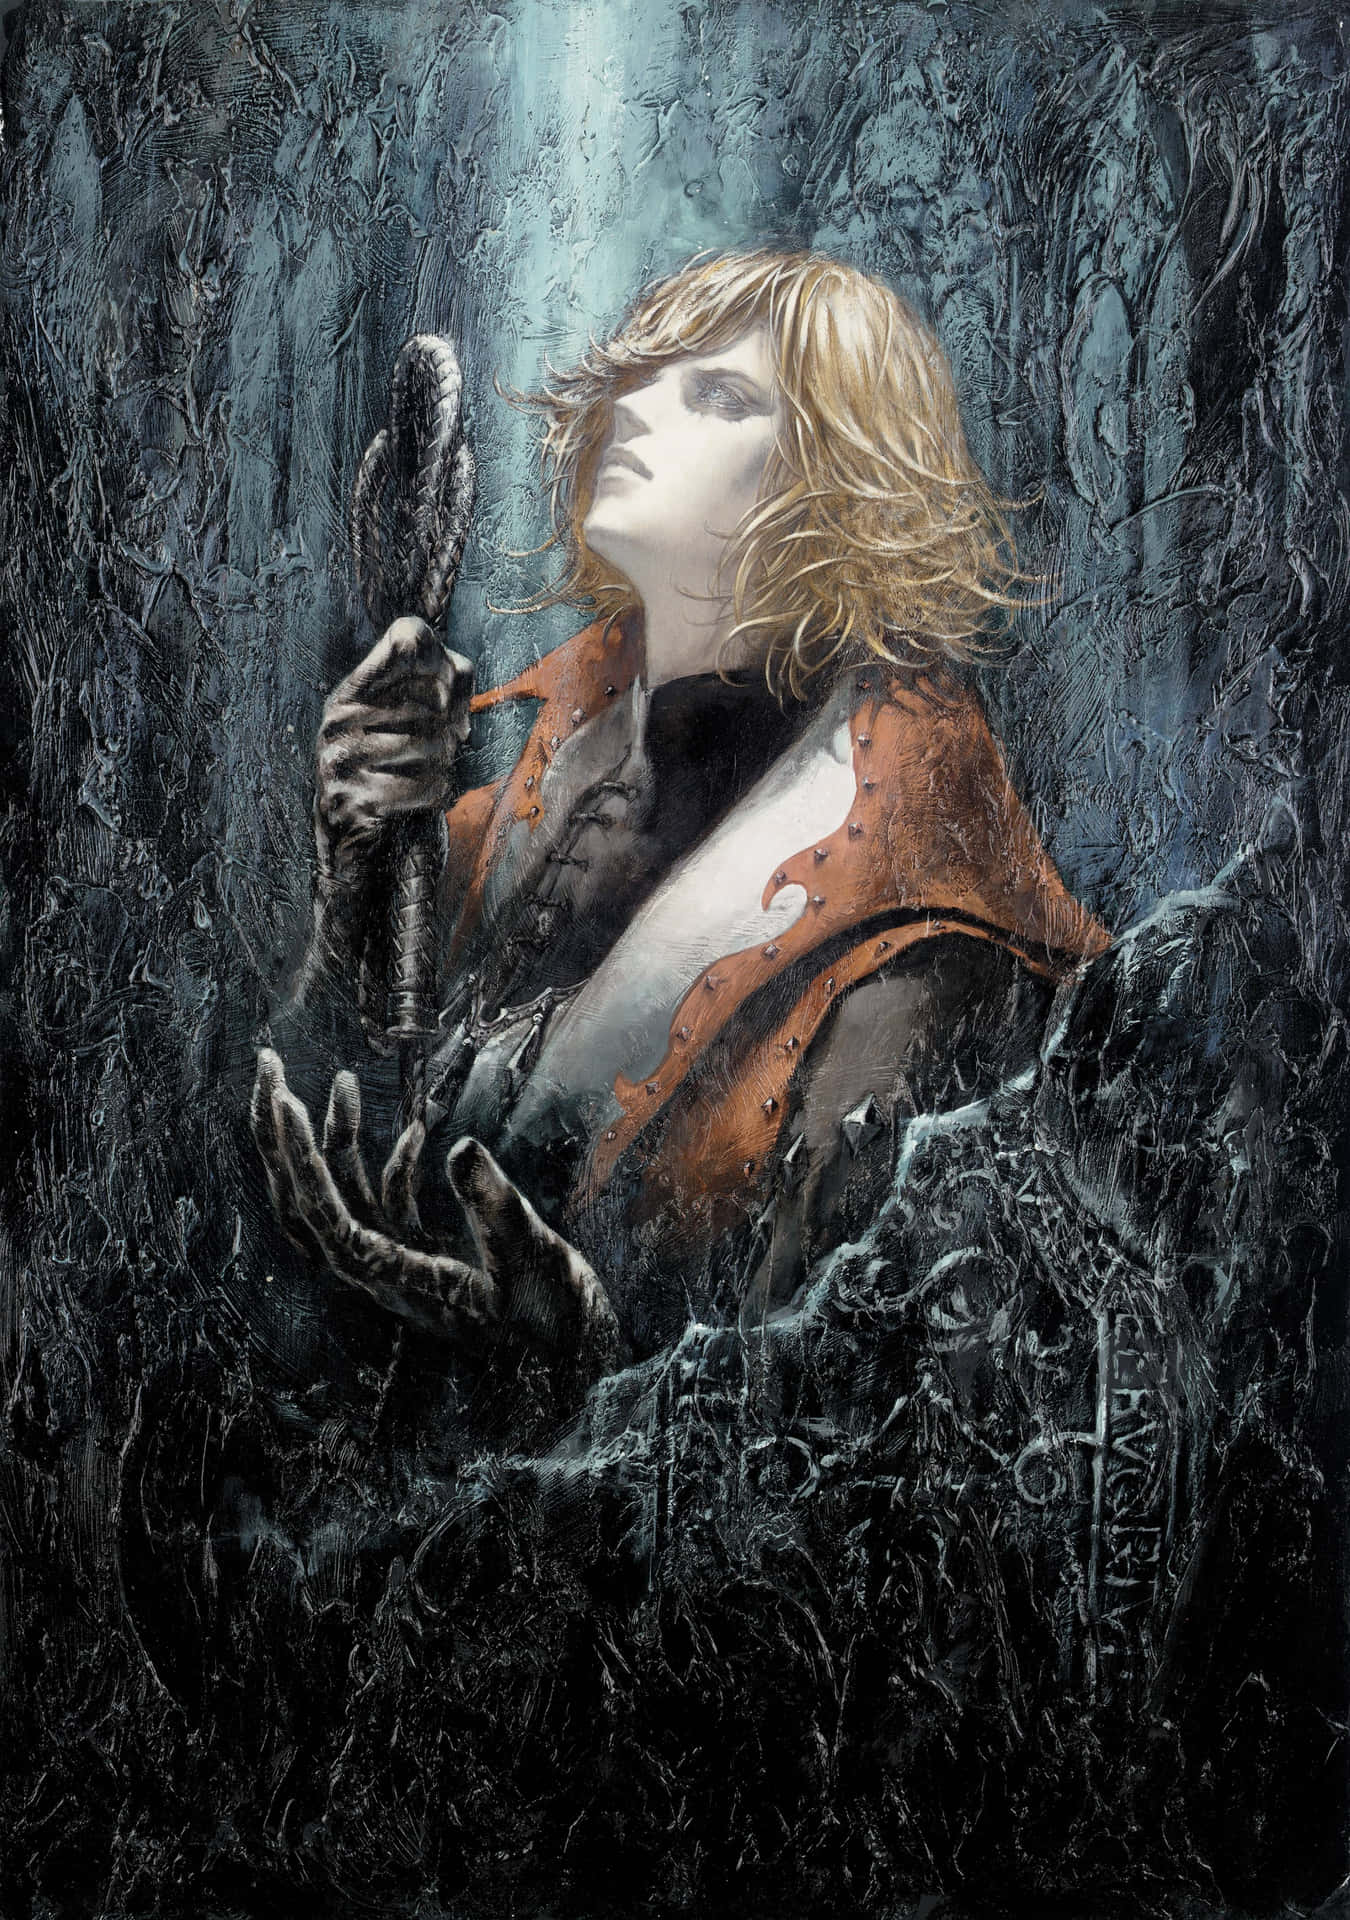 Experience the Gothic World of Castlevania